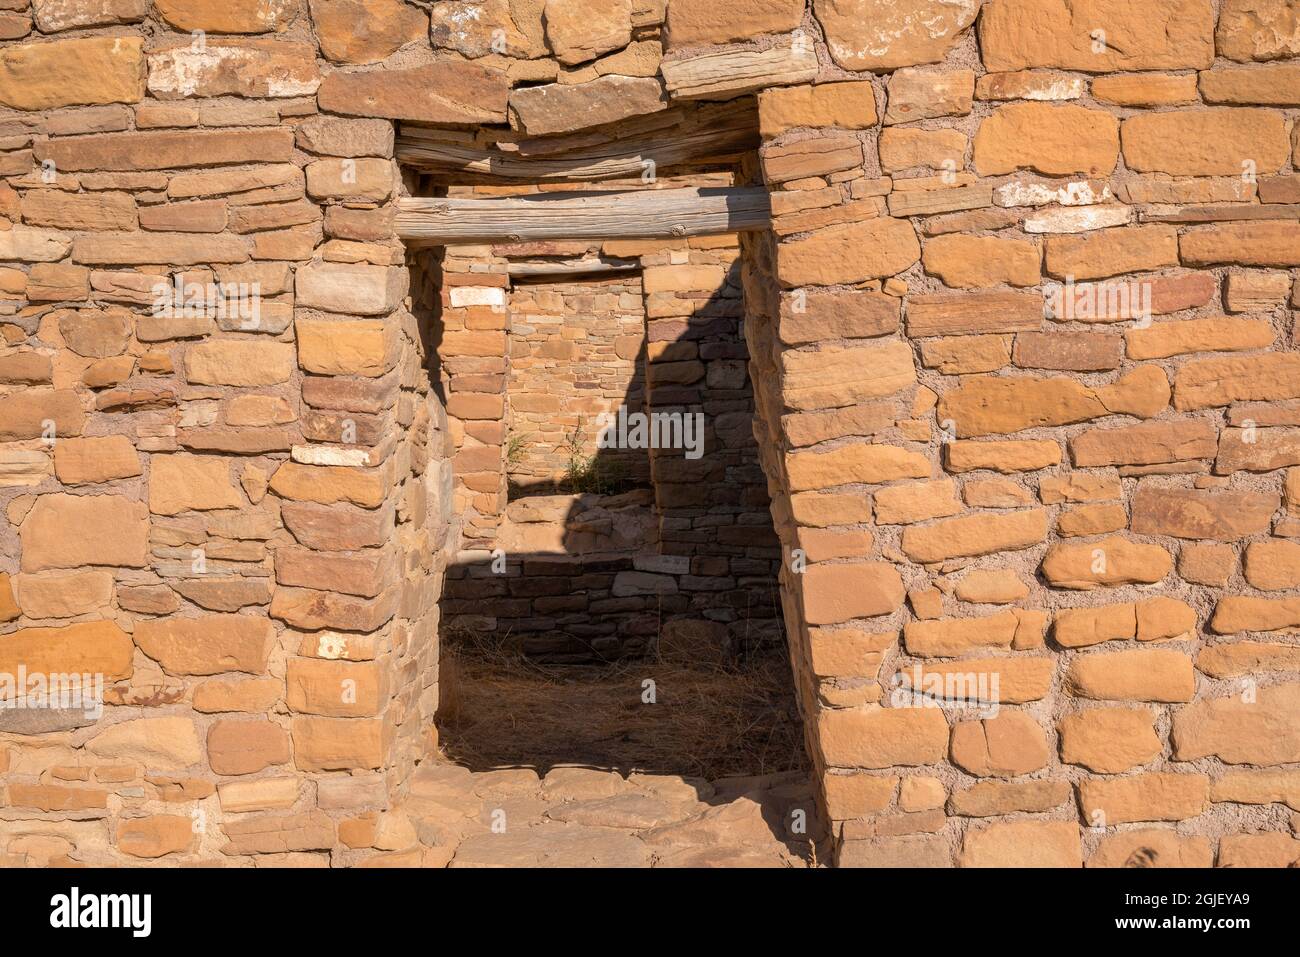 USA, New Mexico. Chaco Culture National Historic Park, Multiple doorways at Pueblo Bonito, a dwelling or Great House occupied from AD 850 to 1150. Stock Photo